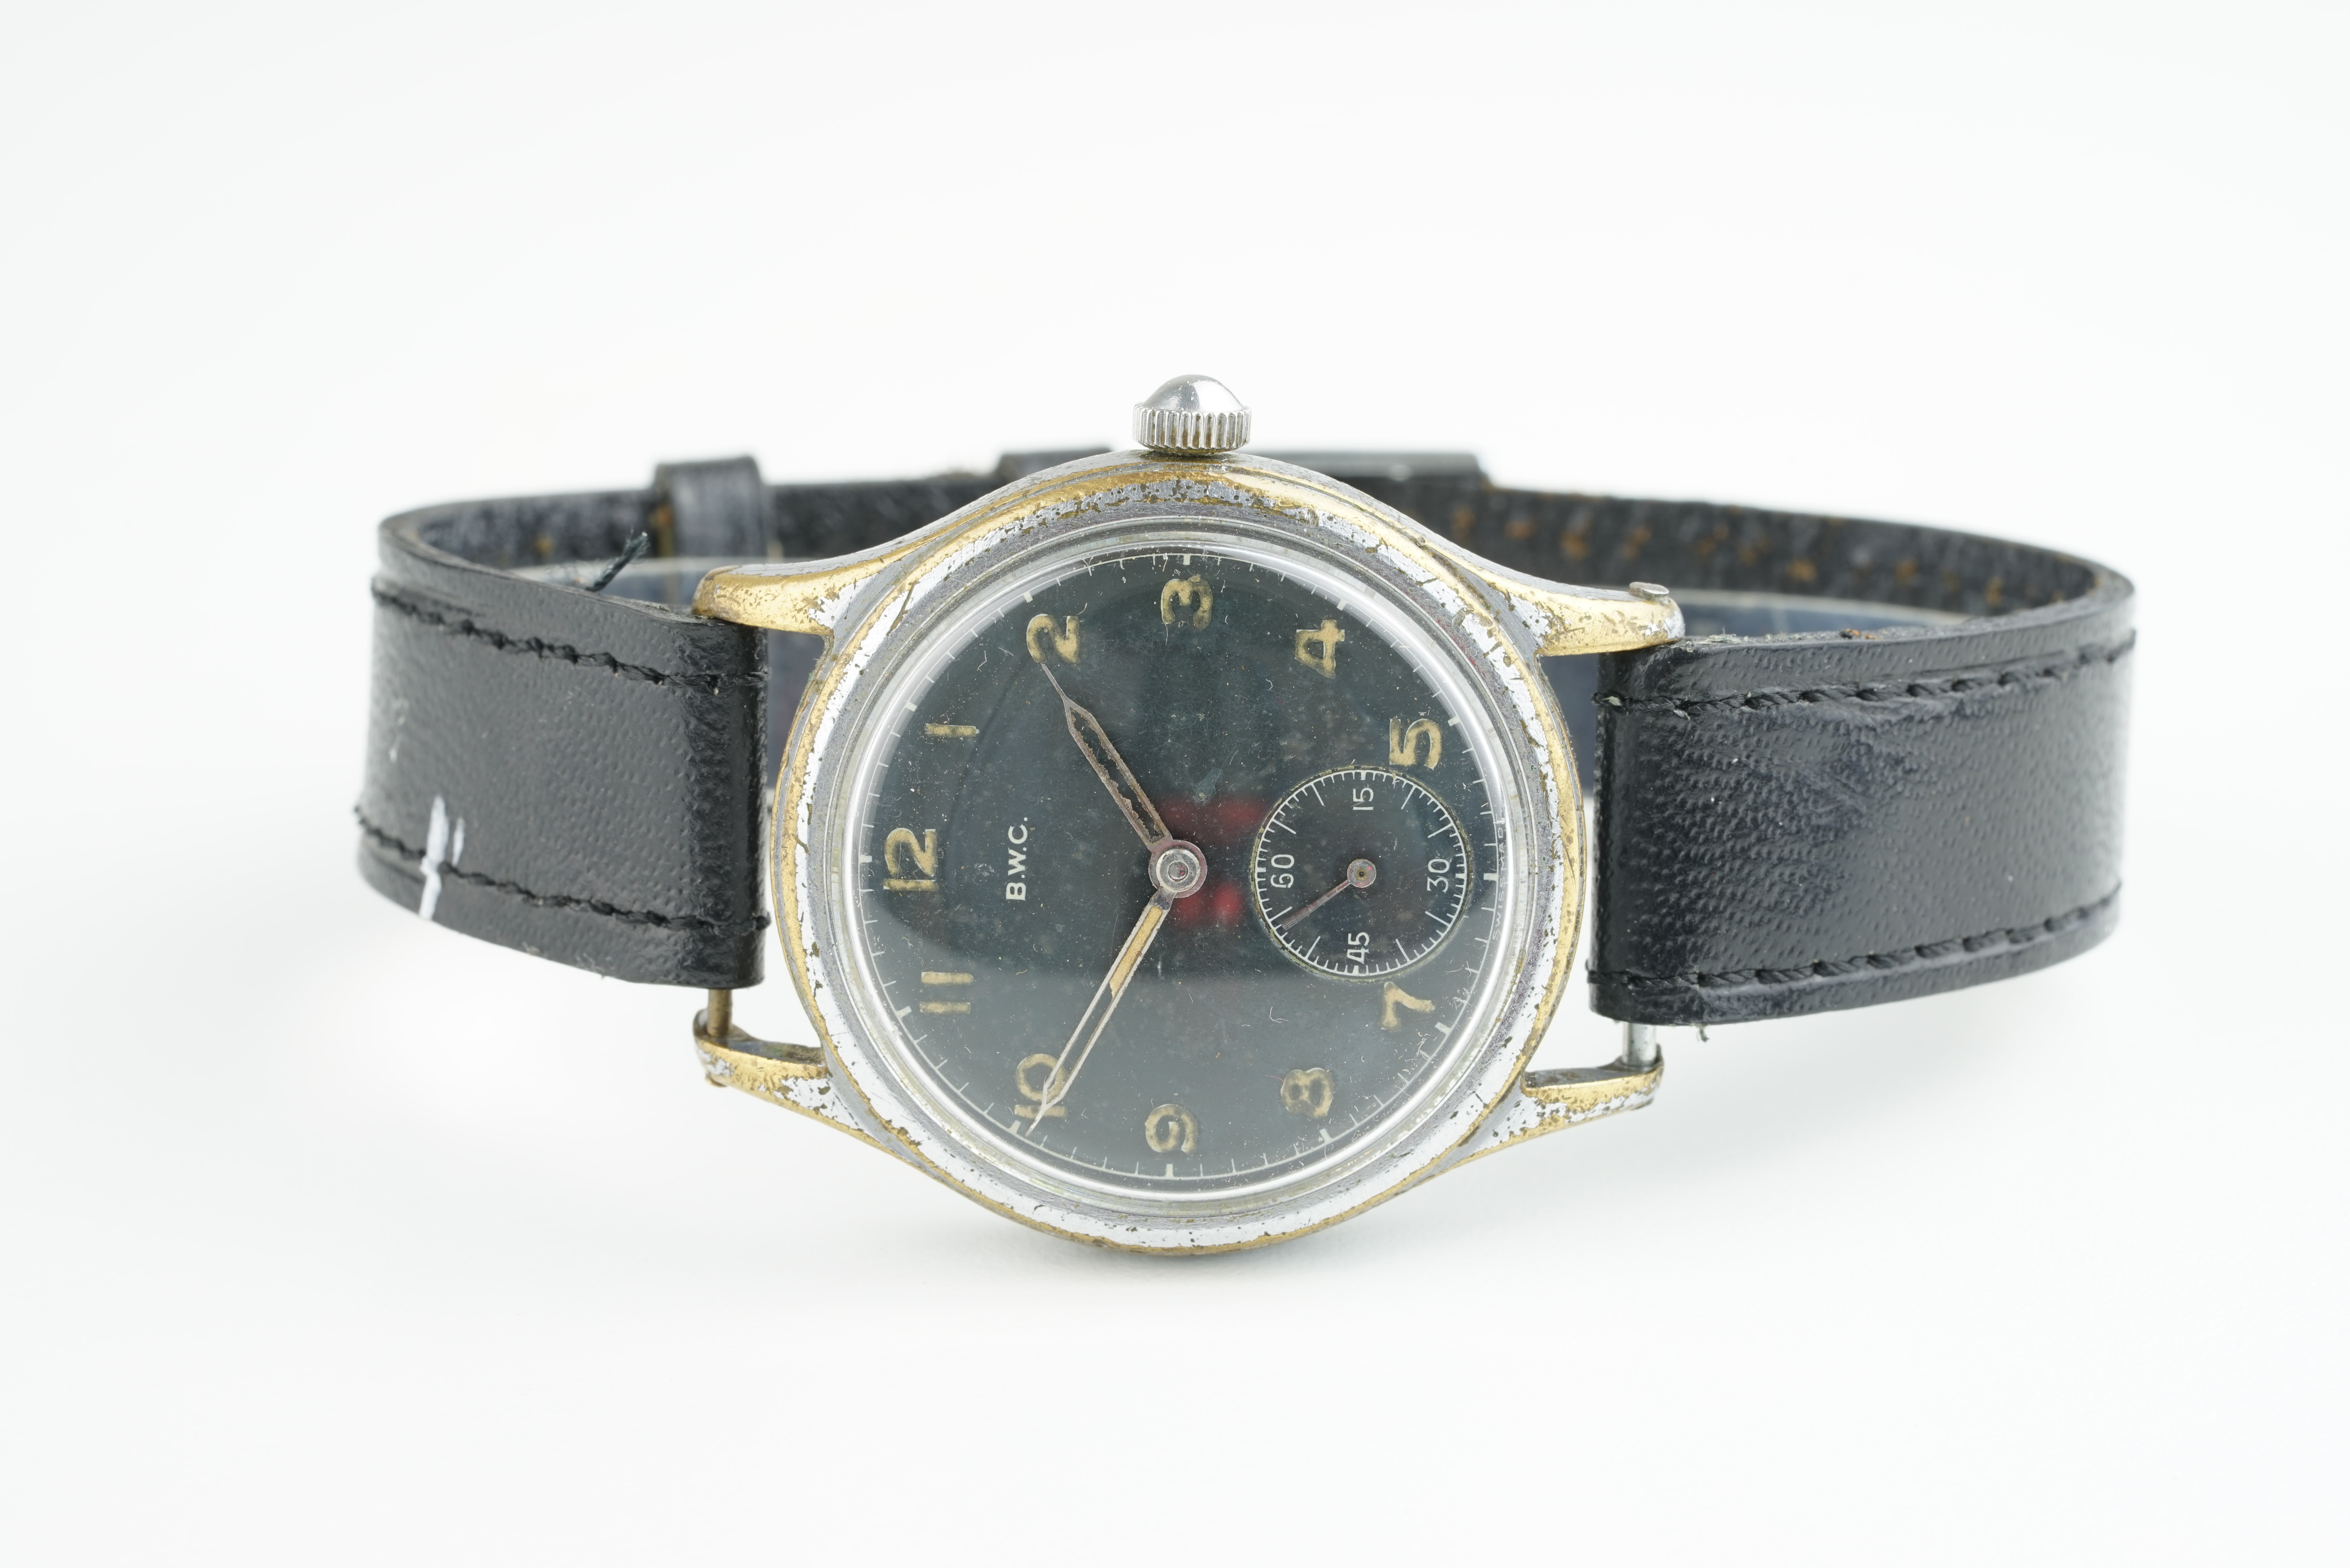 GENTLEMENS B.W.C. GERMAN MILITARY WRISTWATCH, circular black dial with hour markers and hands,